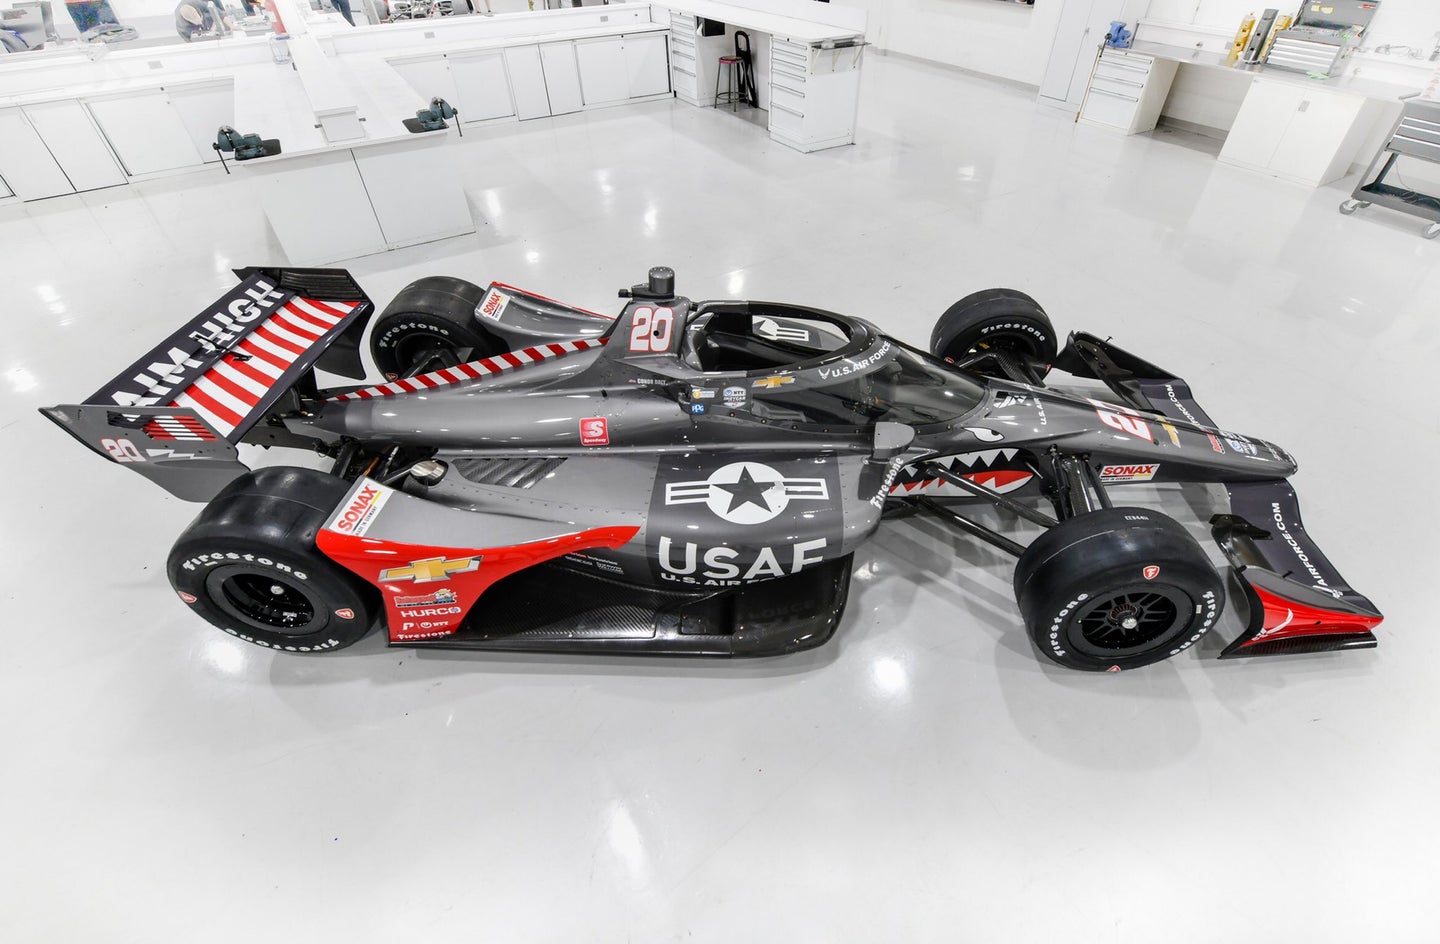 This US Air Force-Sponsored IndyCar Racer Has the Hottest Livery of 2020